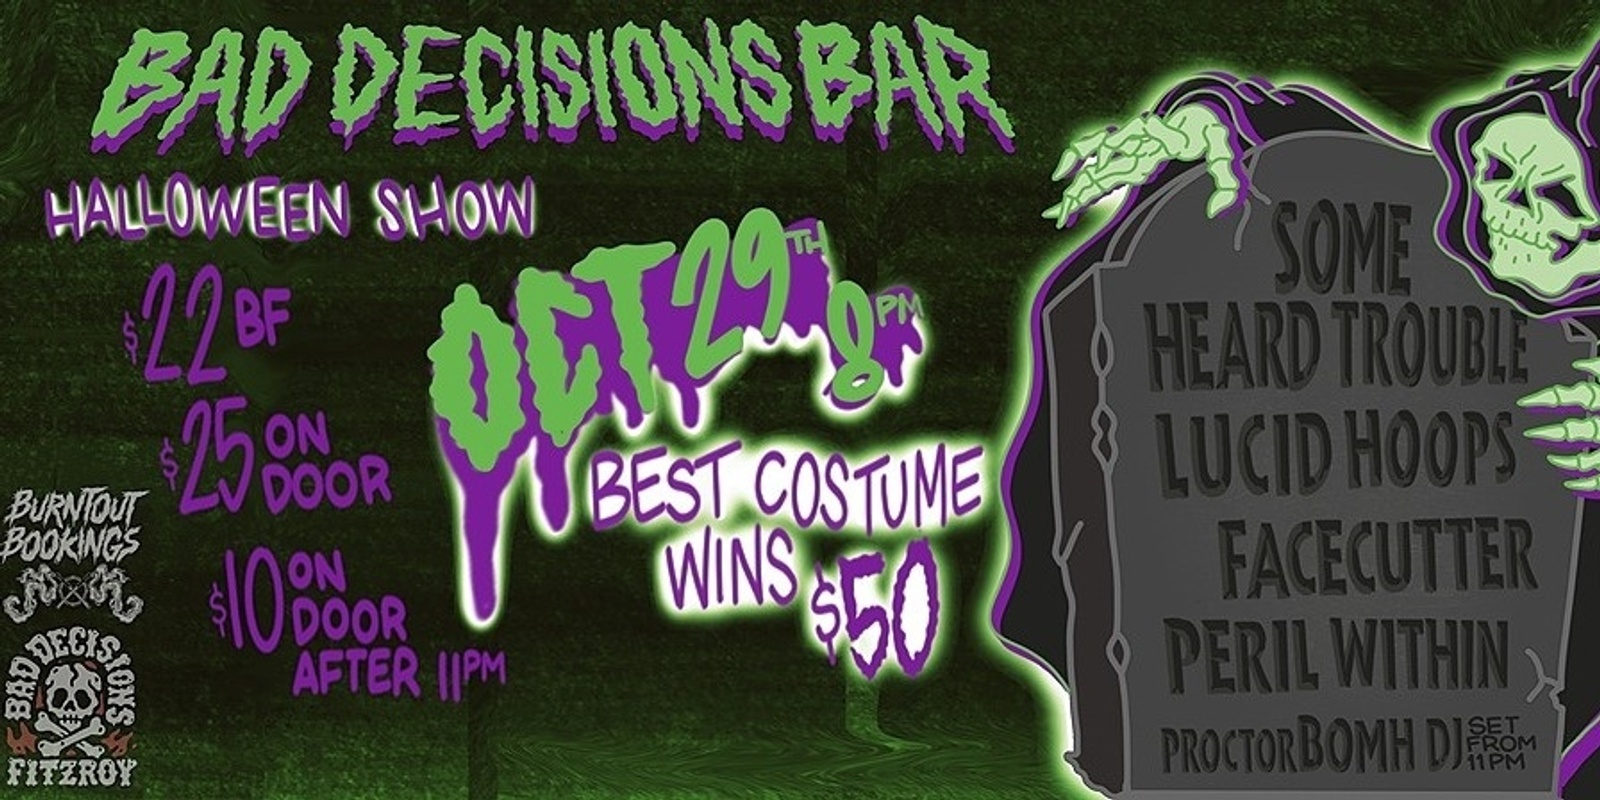 Banner image for Burntout Bookings Presents Halloween @ Bad Decisions Bar 